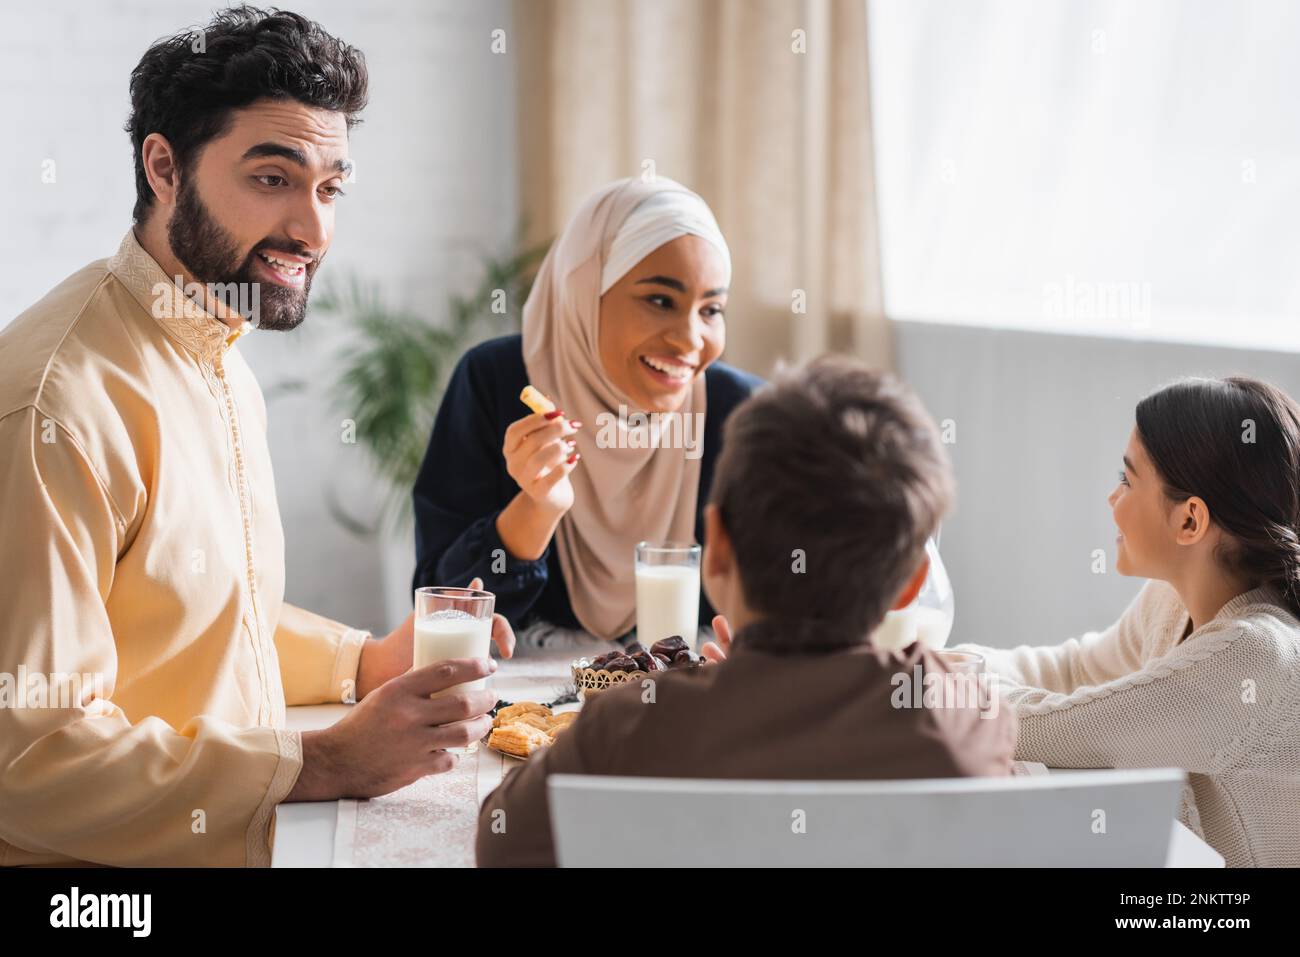 Muslim father talking to son near happy family during suhur breakfast,stock image Stock Photo